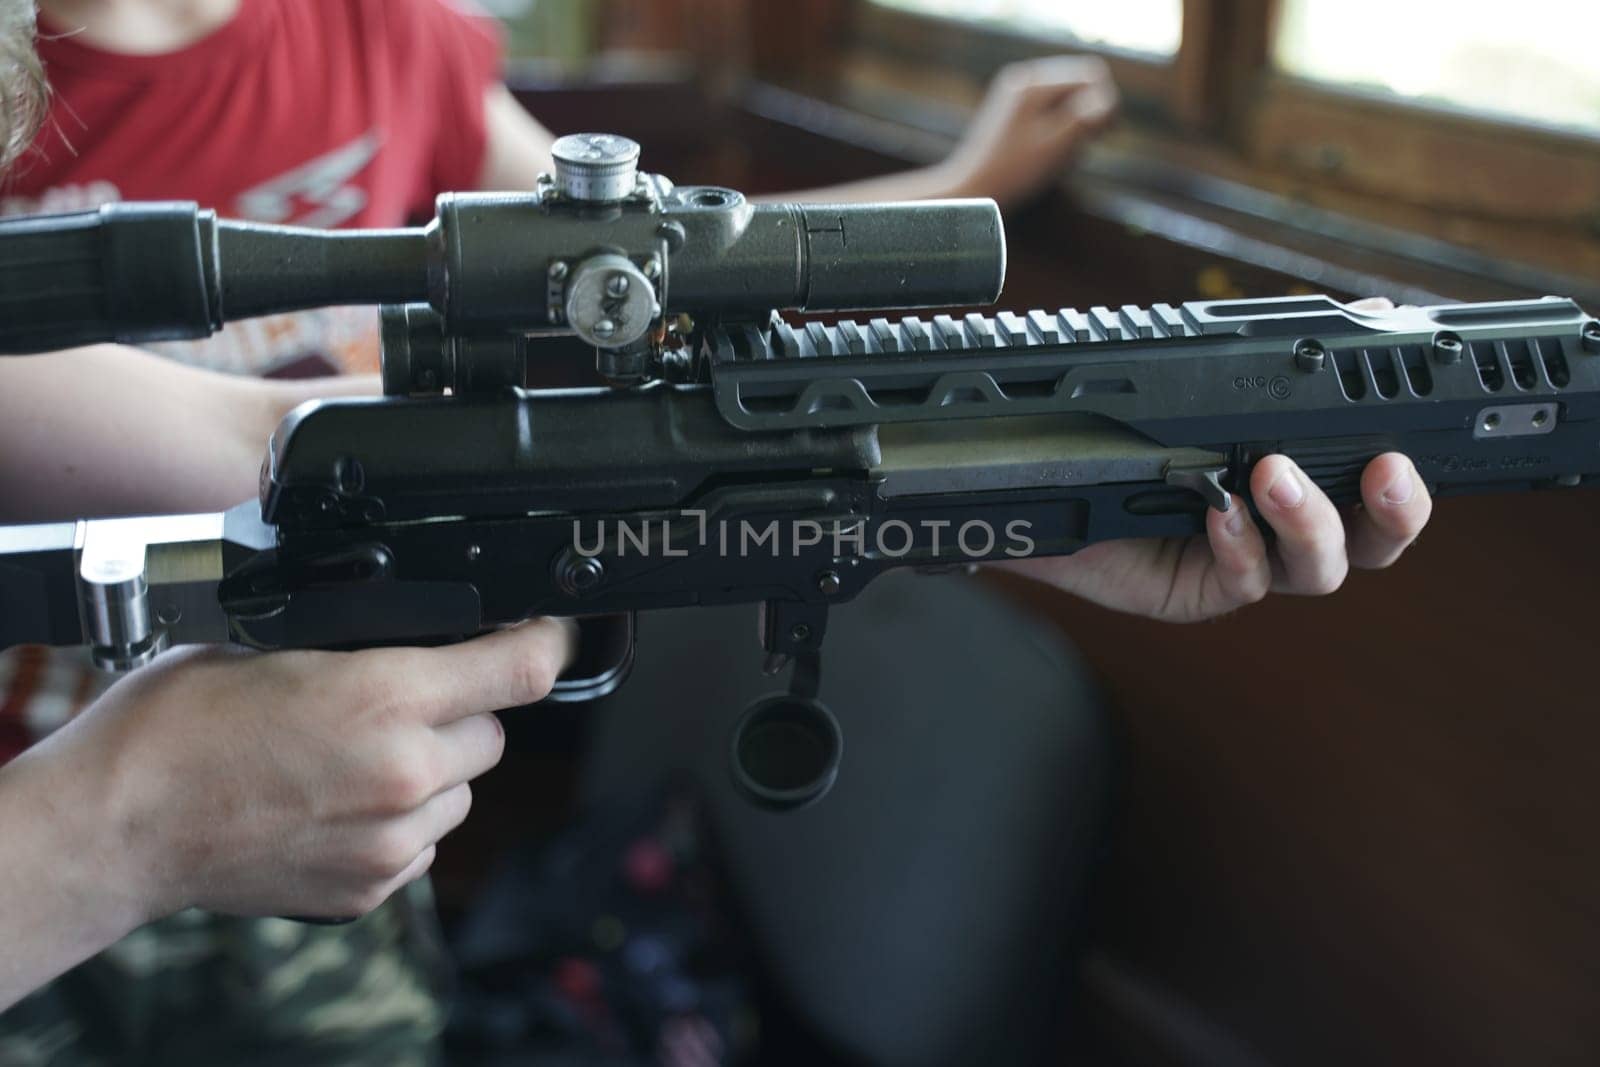 A child in camouflage clothing is holding a rifle equipped with an optical sight, focusing intently on handling the firearm.